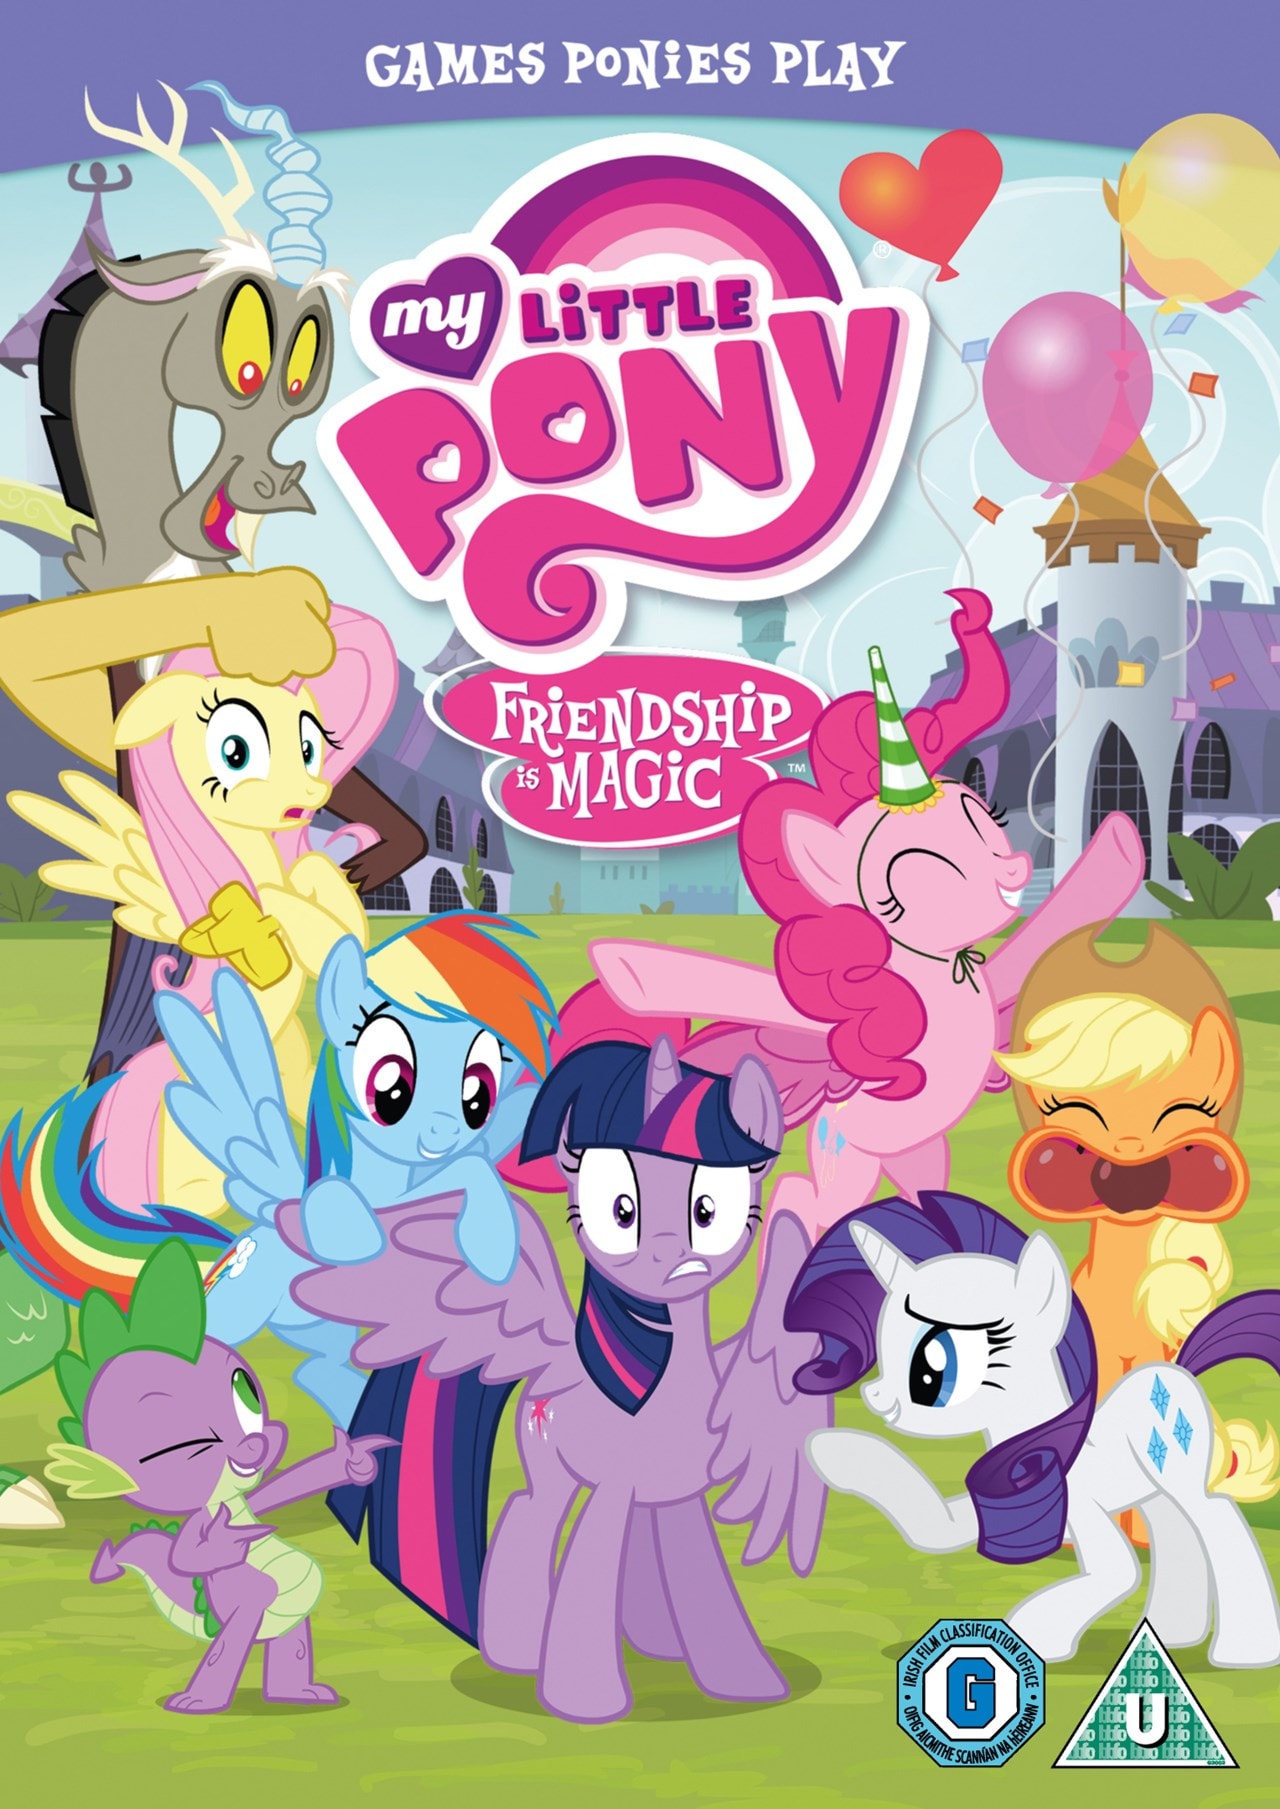 my-little-pony-friendship-is-magic-games-ponies-play-dvd-free-shipping-over-20-hmv-store